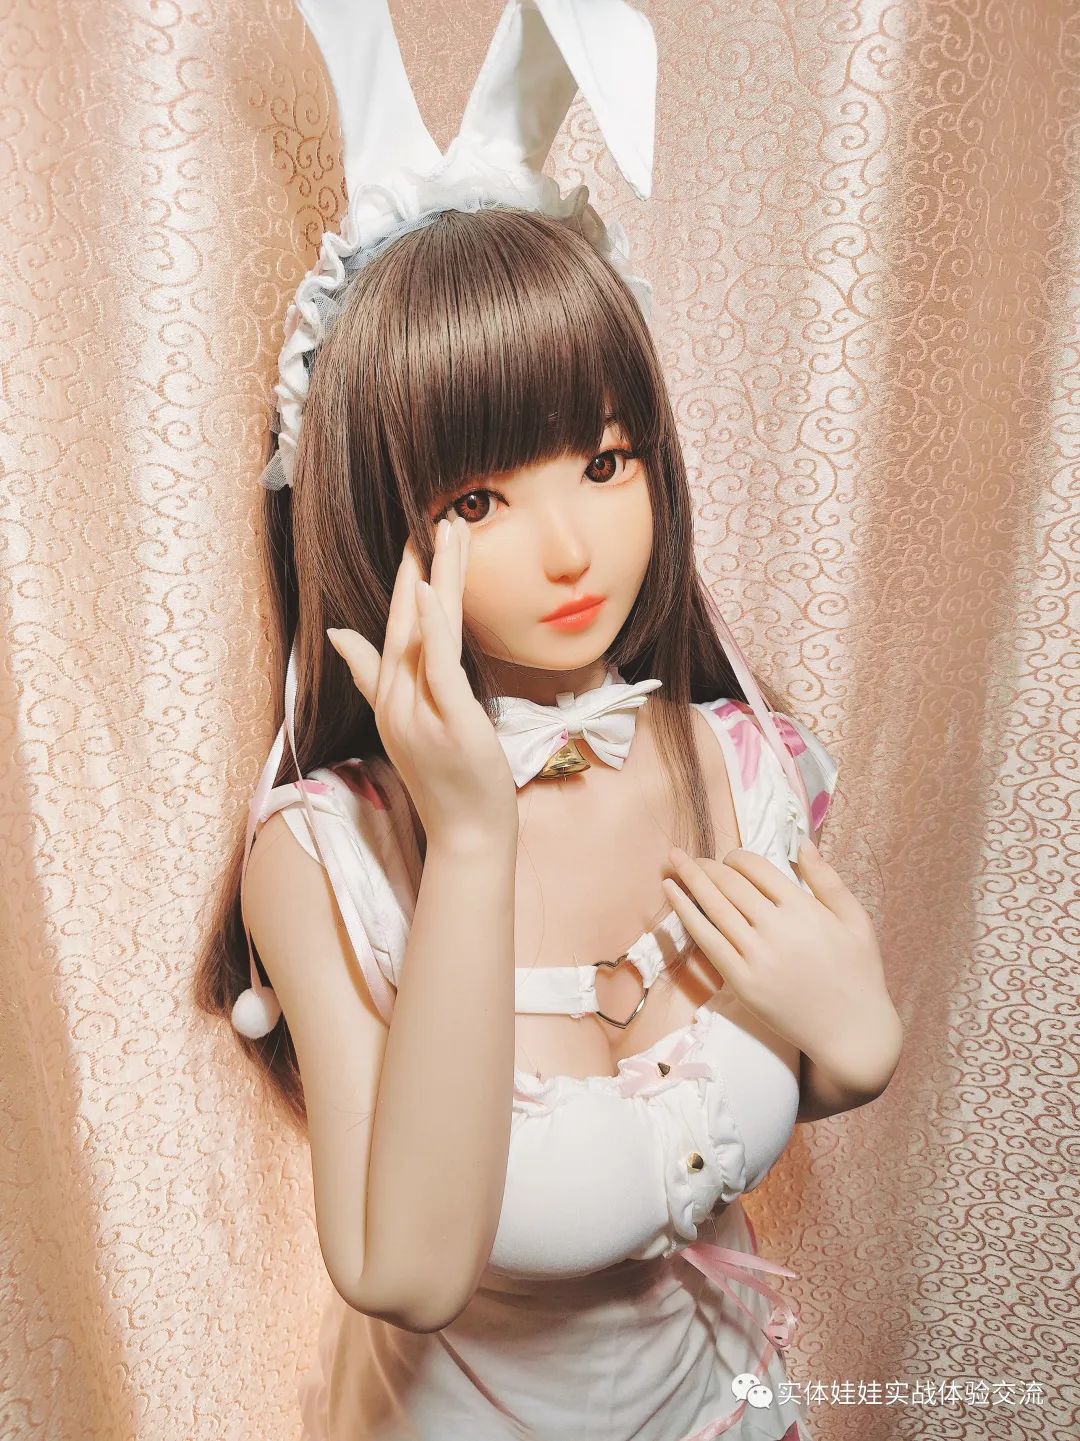 What materials are commonly used for full body dolls? Is it silicone?